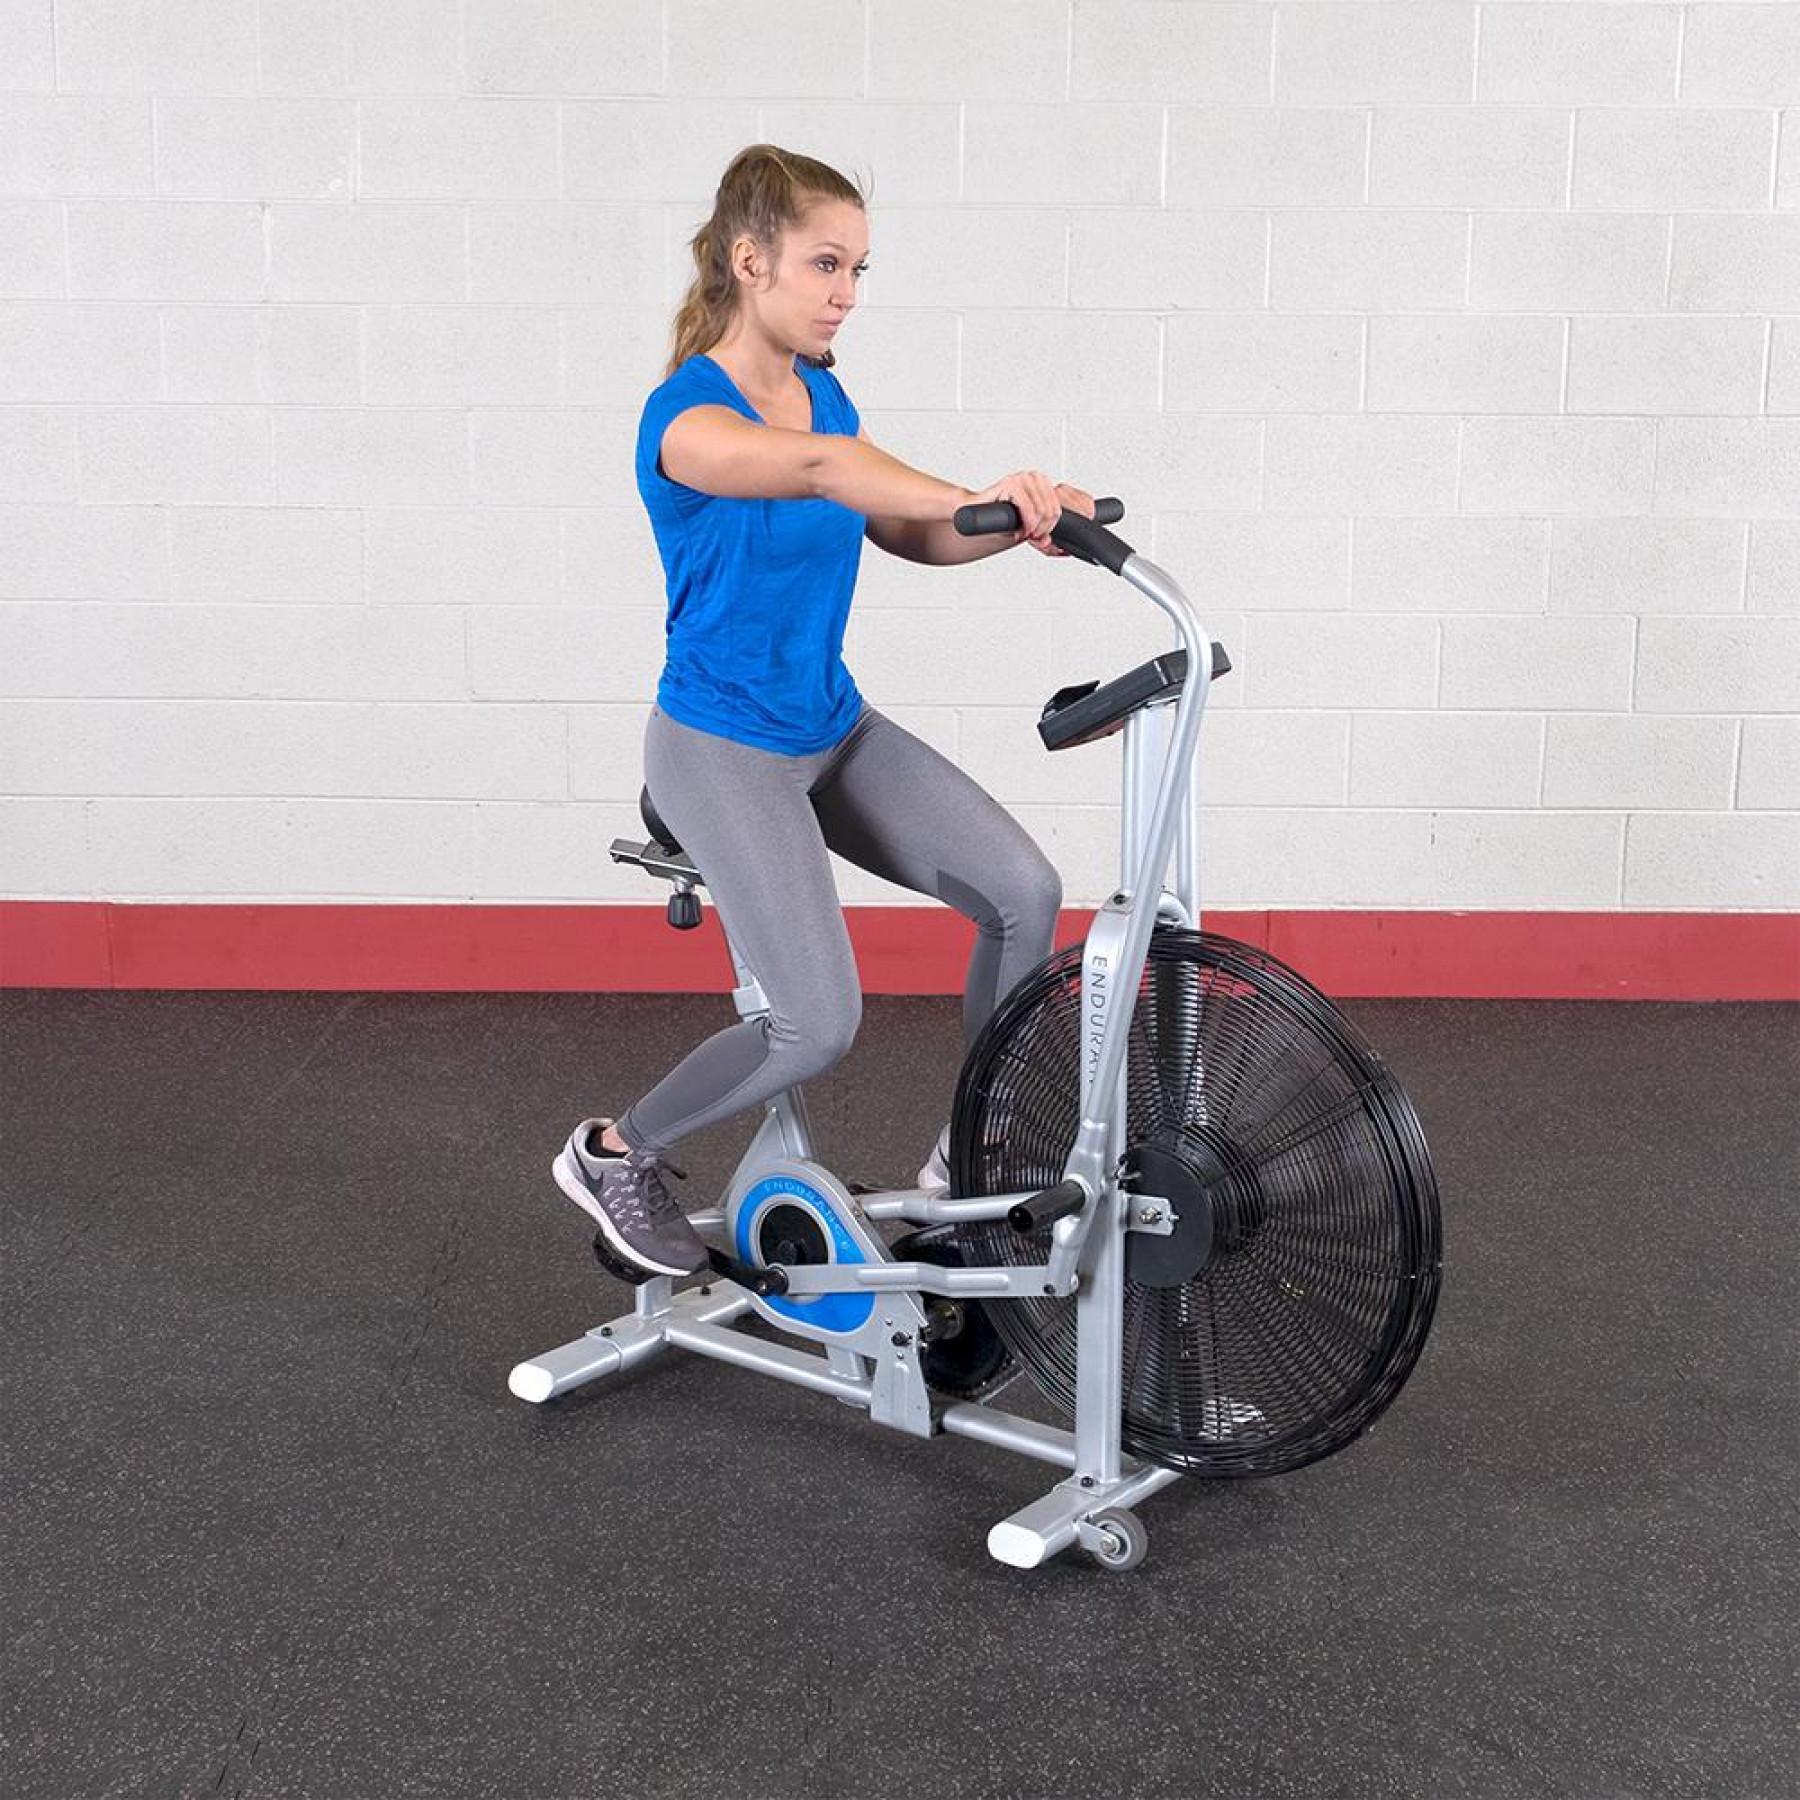 Exercise bike with arms Endurance